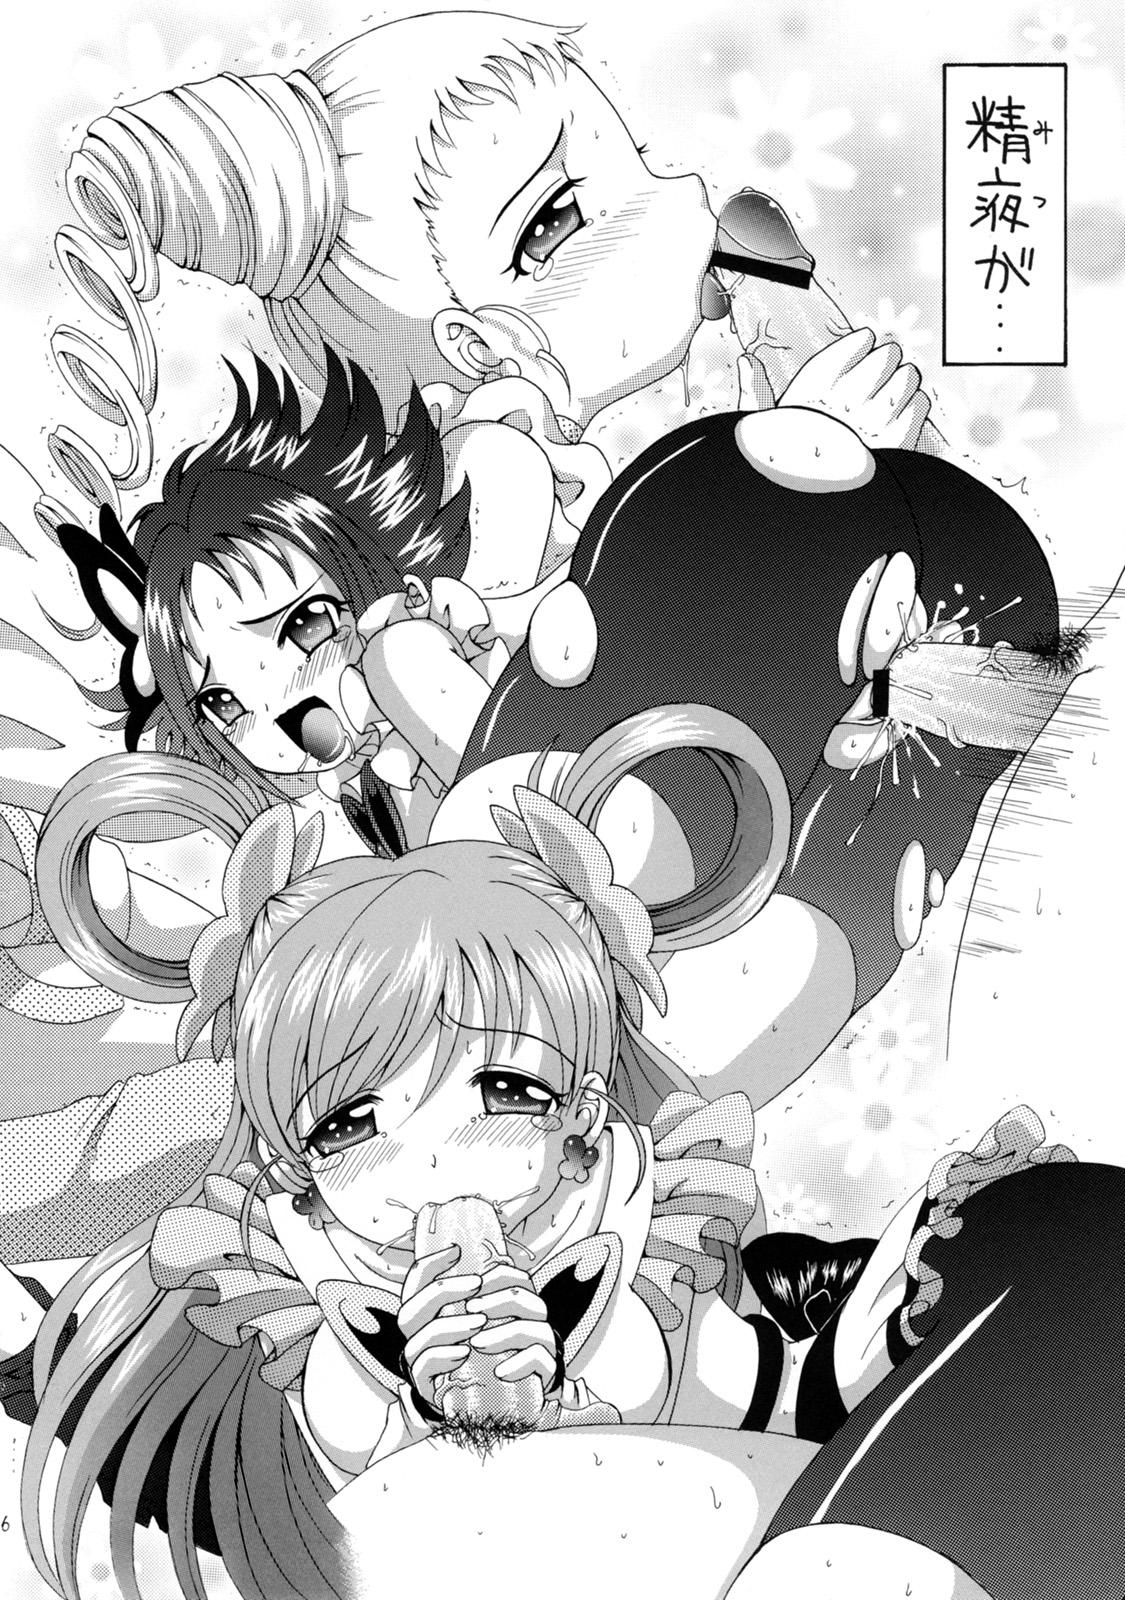 Fuck Pussy Yes! Five 1 - Pretty cure Yes precure 5 Erotica - Page 6